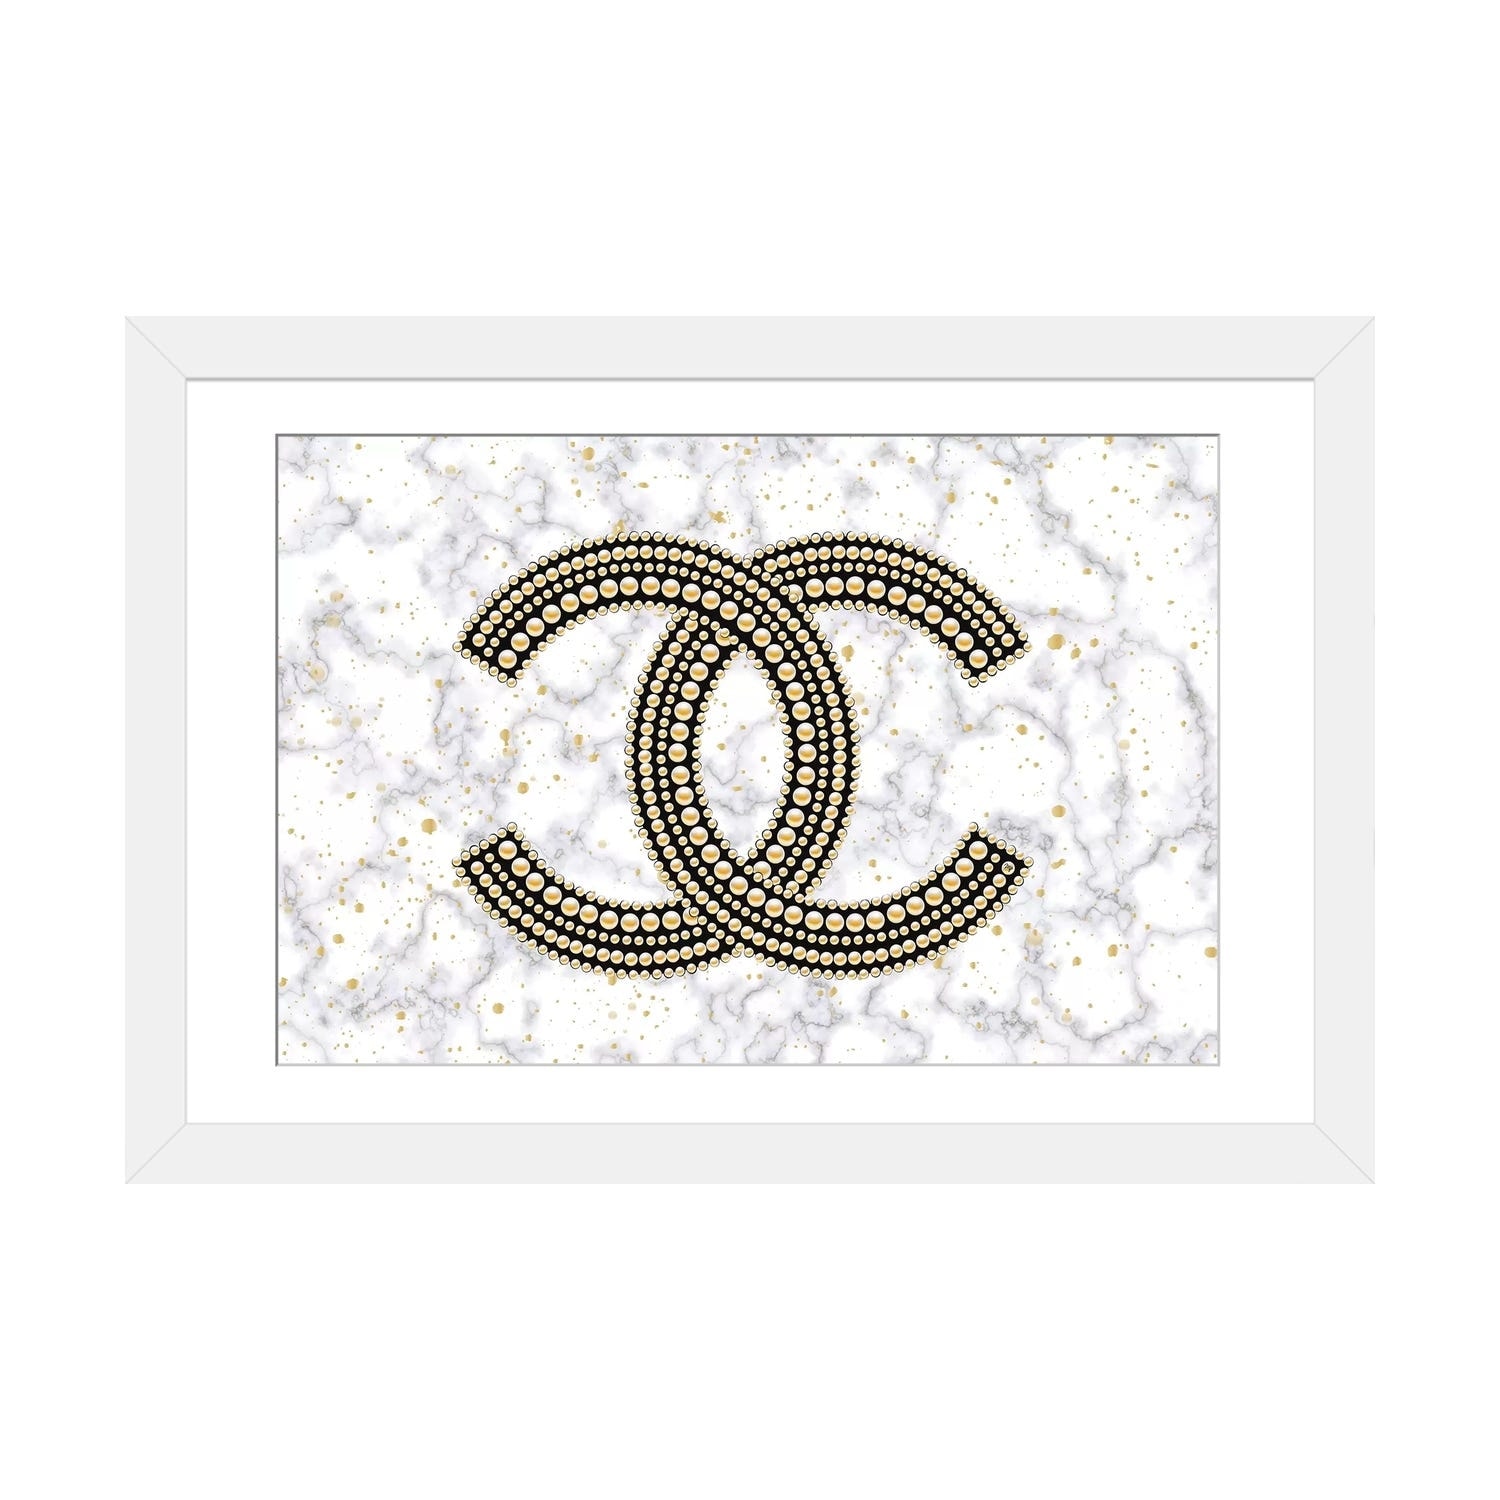 Chanel Champagne Art: Canvas Prints, Frames & Posters